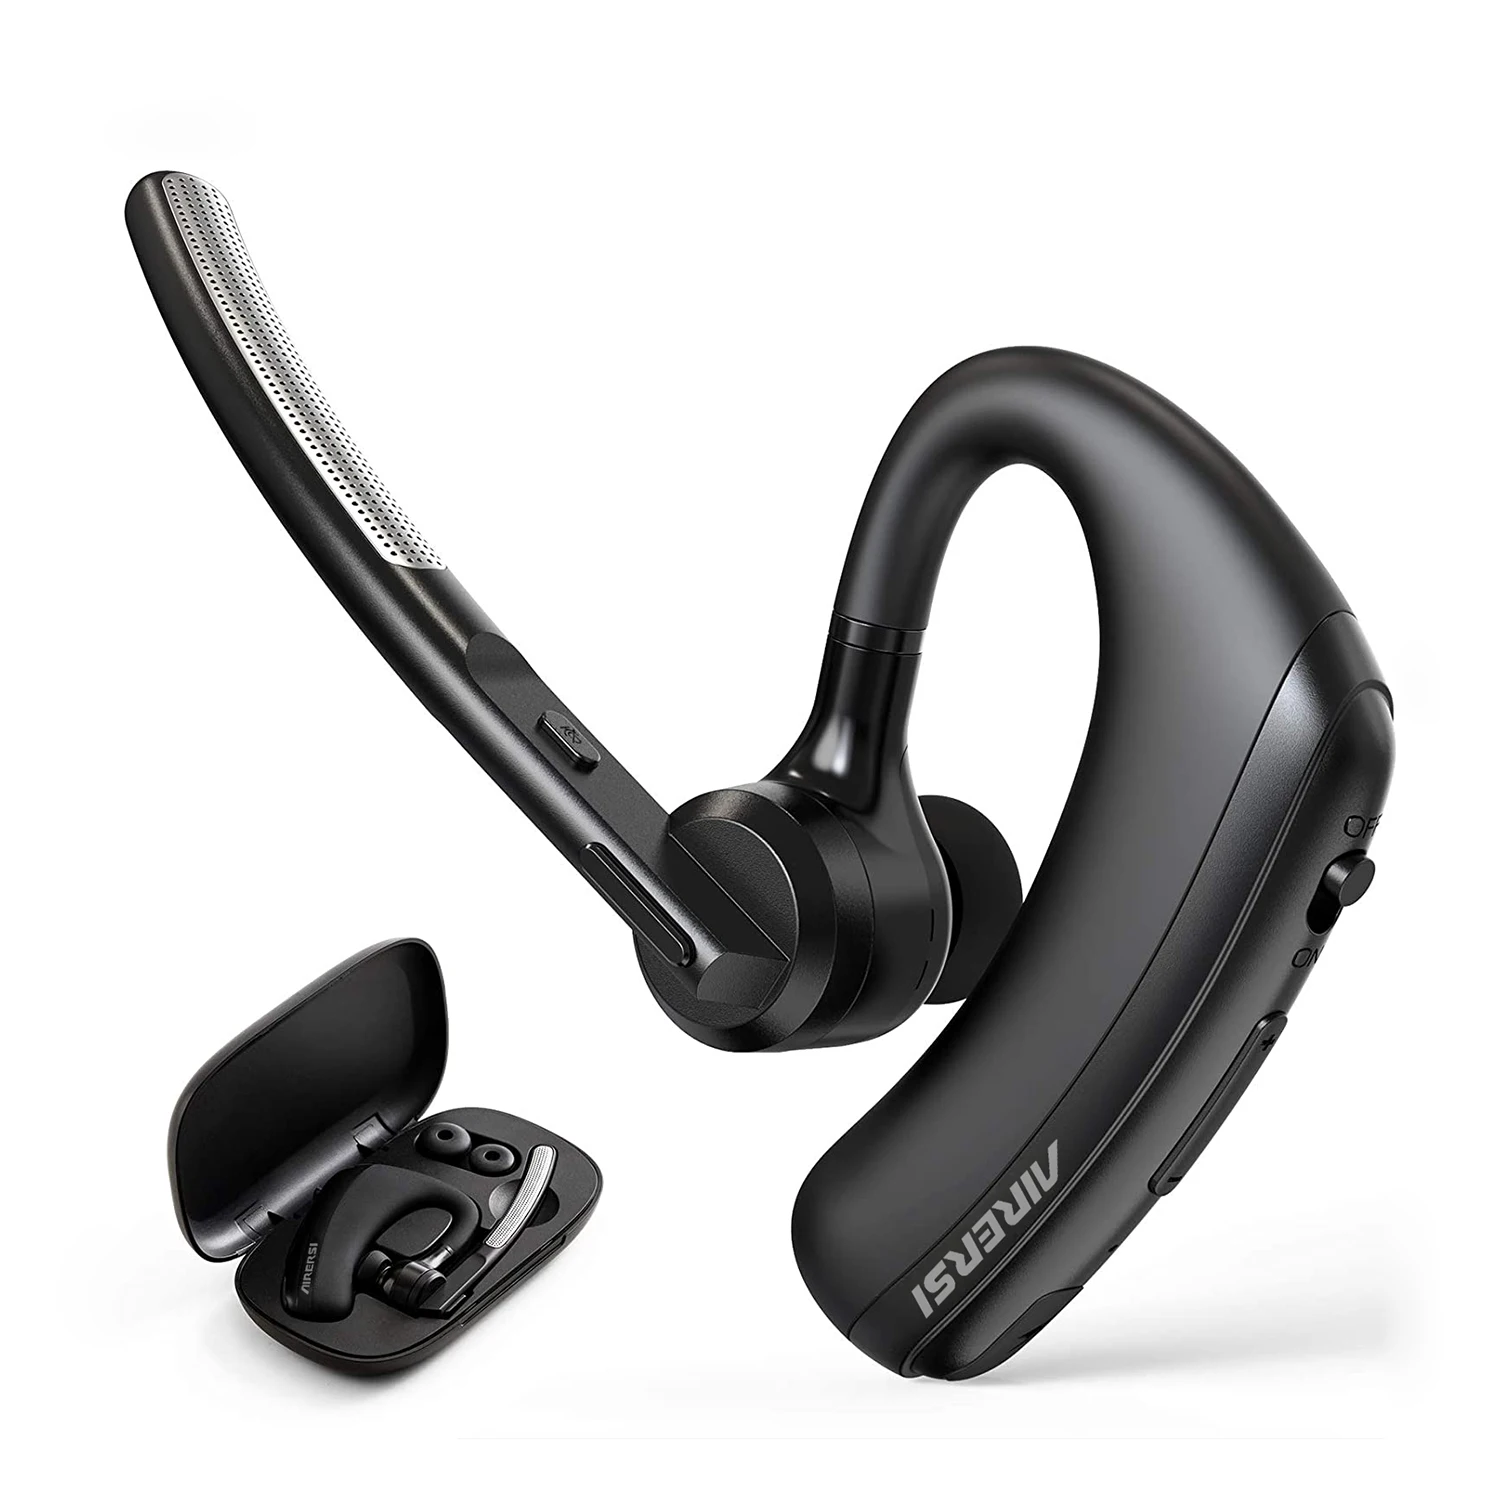 

Newest K20 Wireless Earphone 5.1 Earpiece Handsfree Noise Reduction Bluetooth Headset With Apt-X HD Dual Mic For All Smart Phone